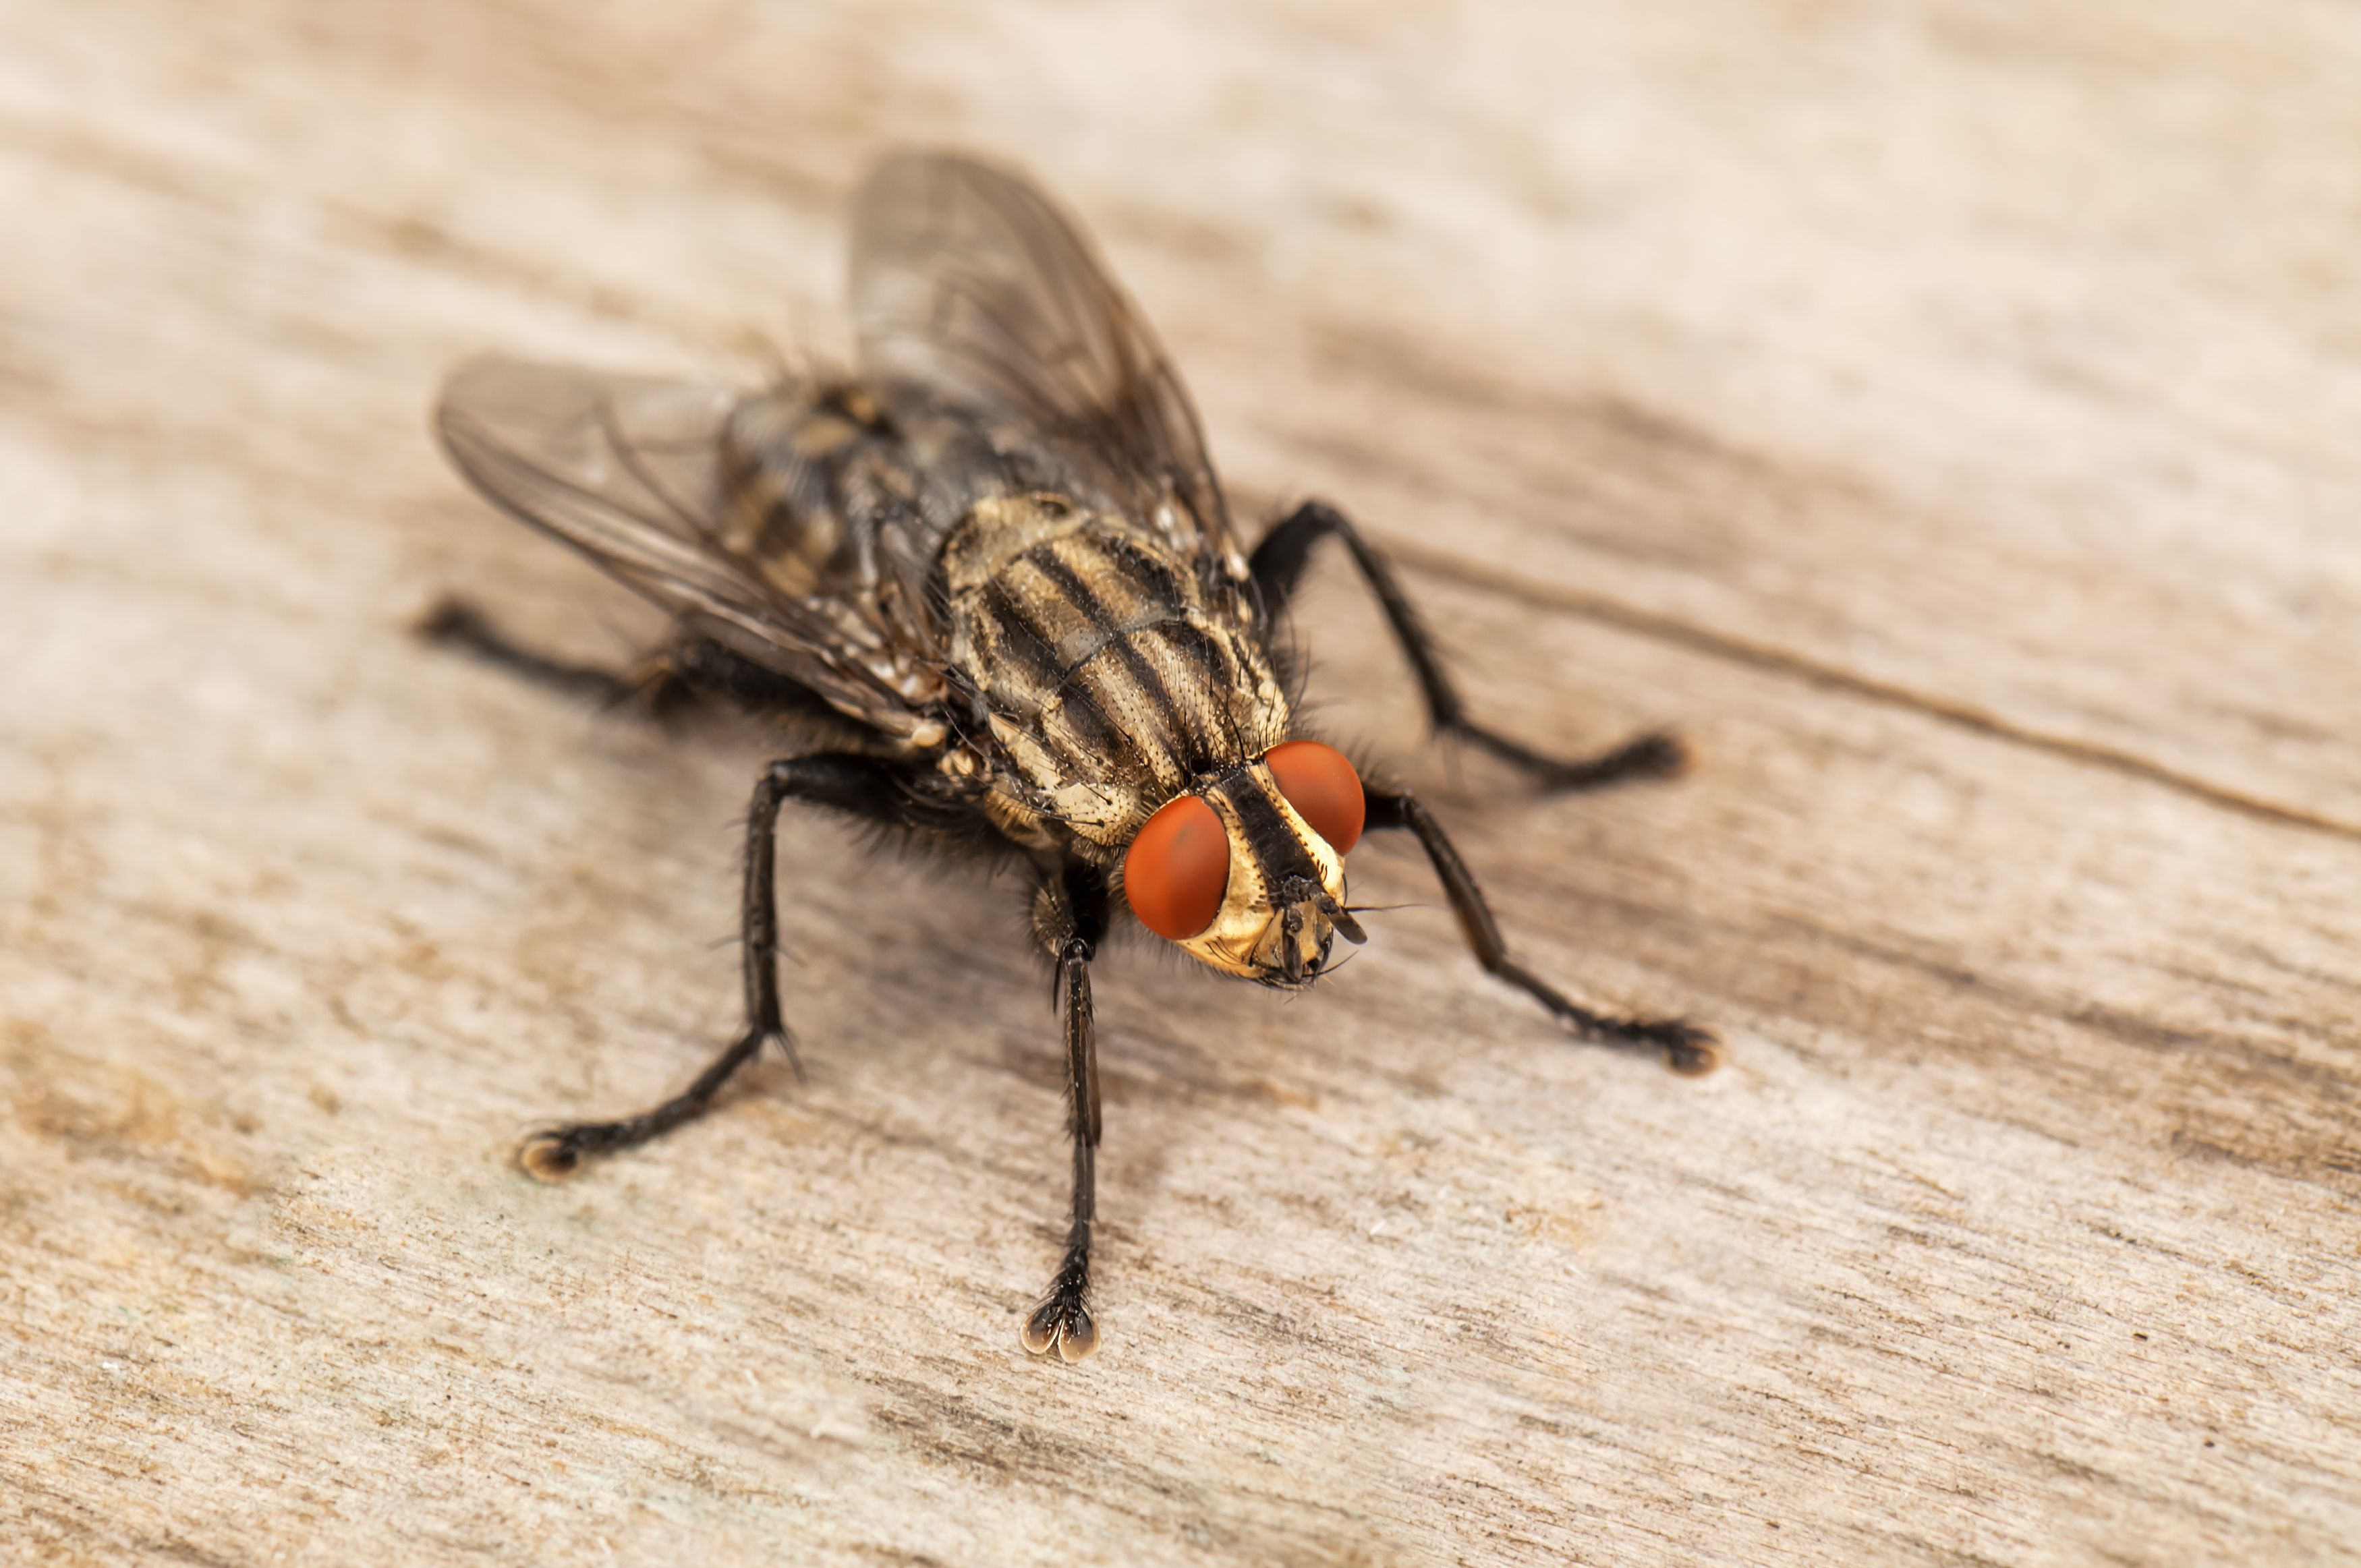 How to Get Rid of Houseflies at Home Naturally